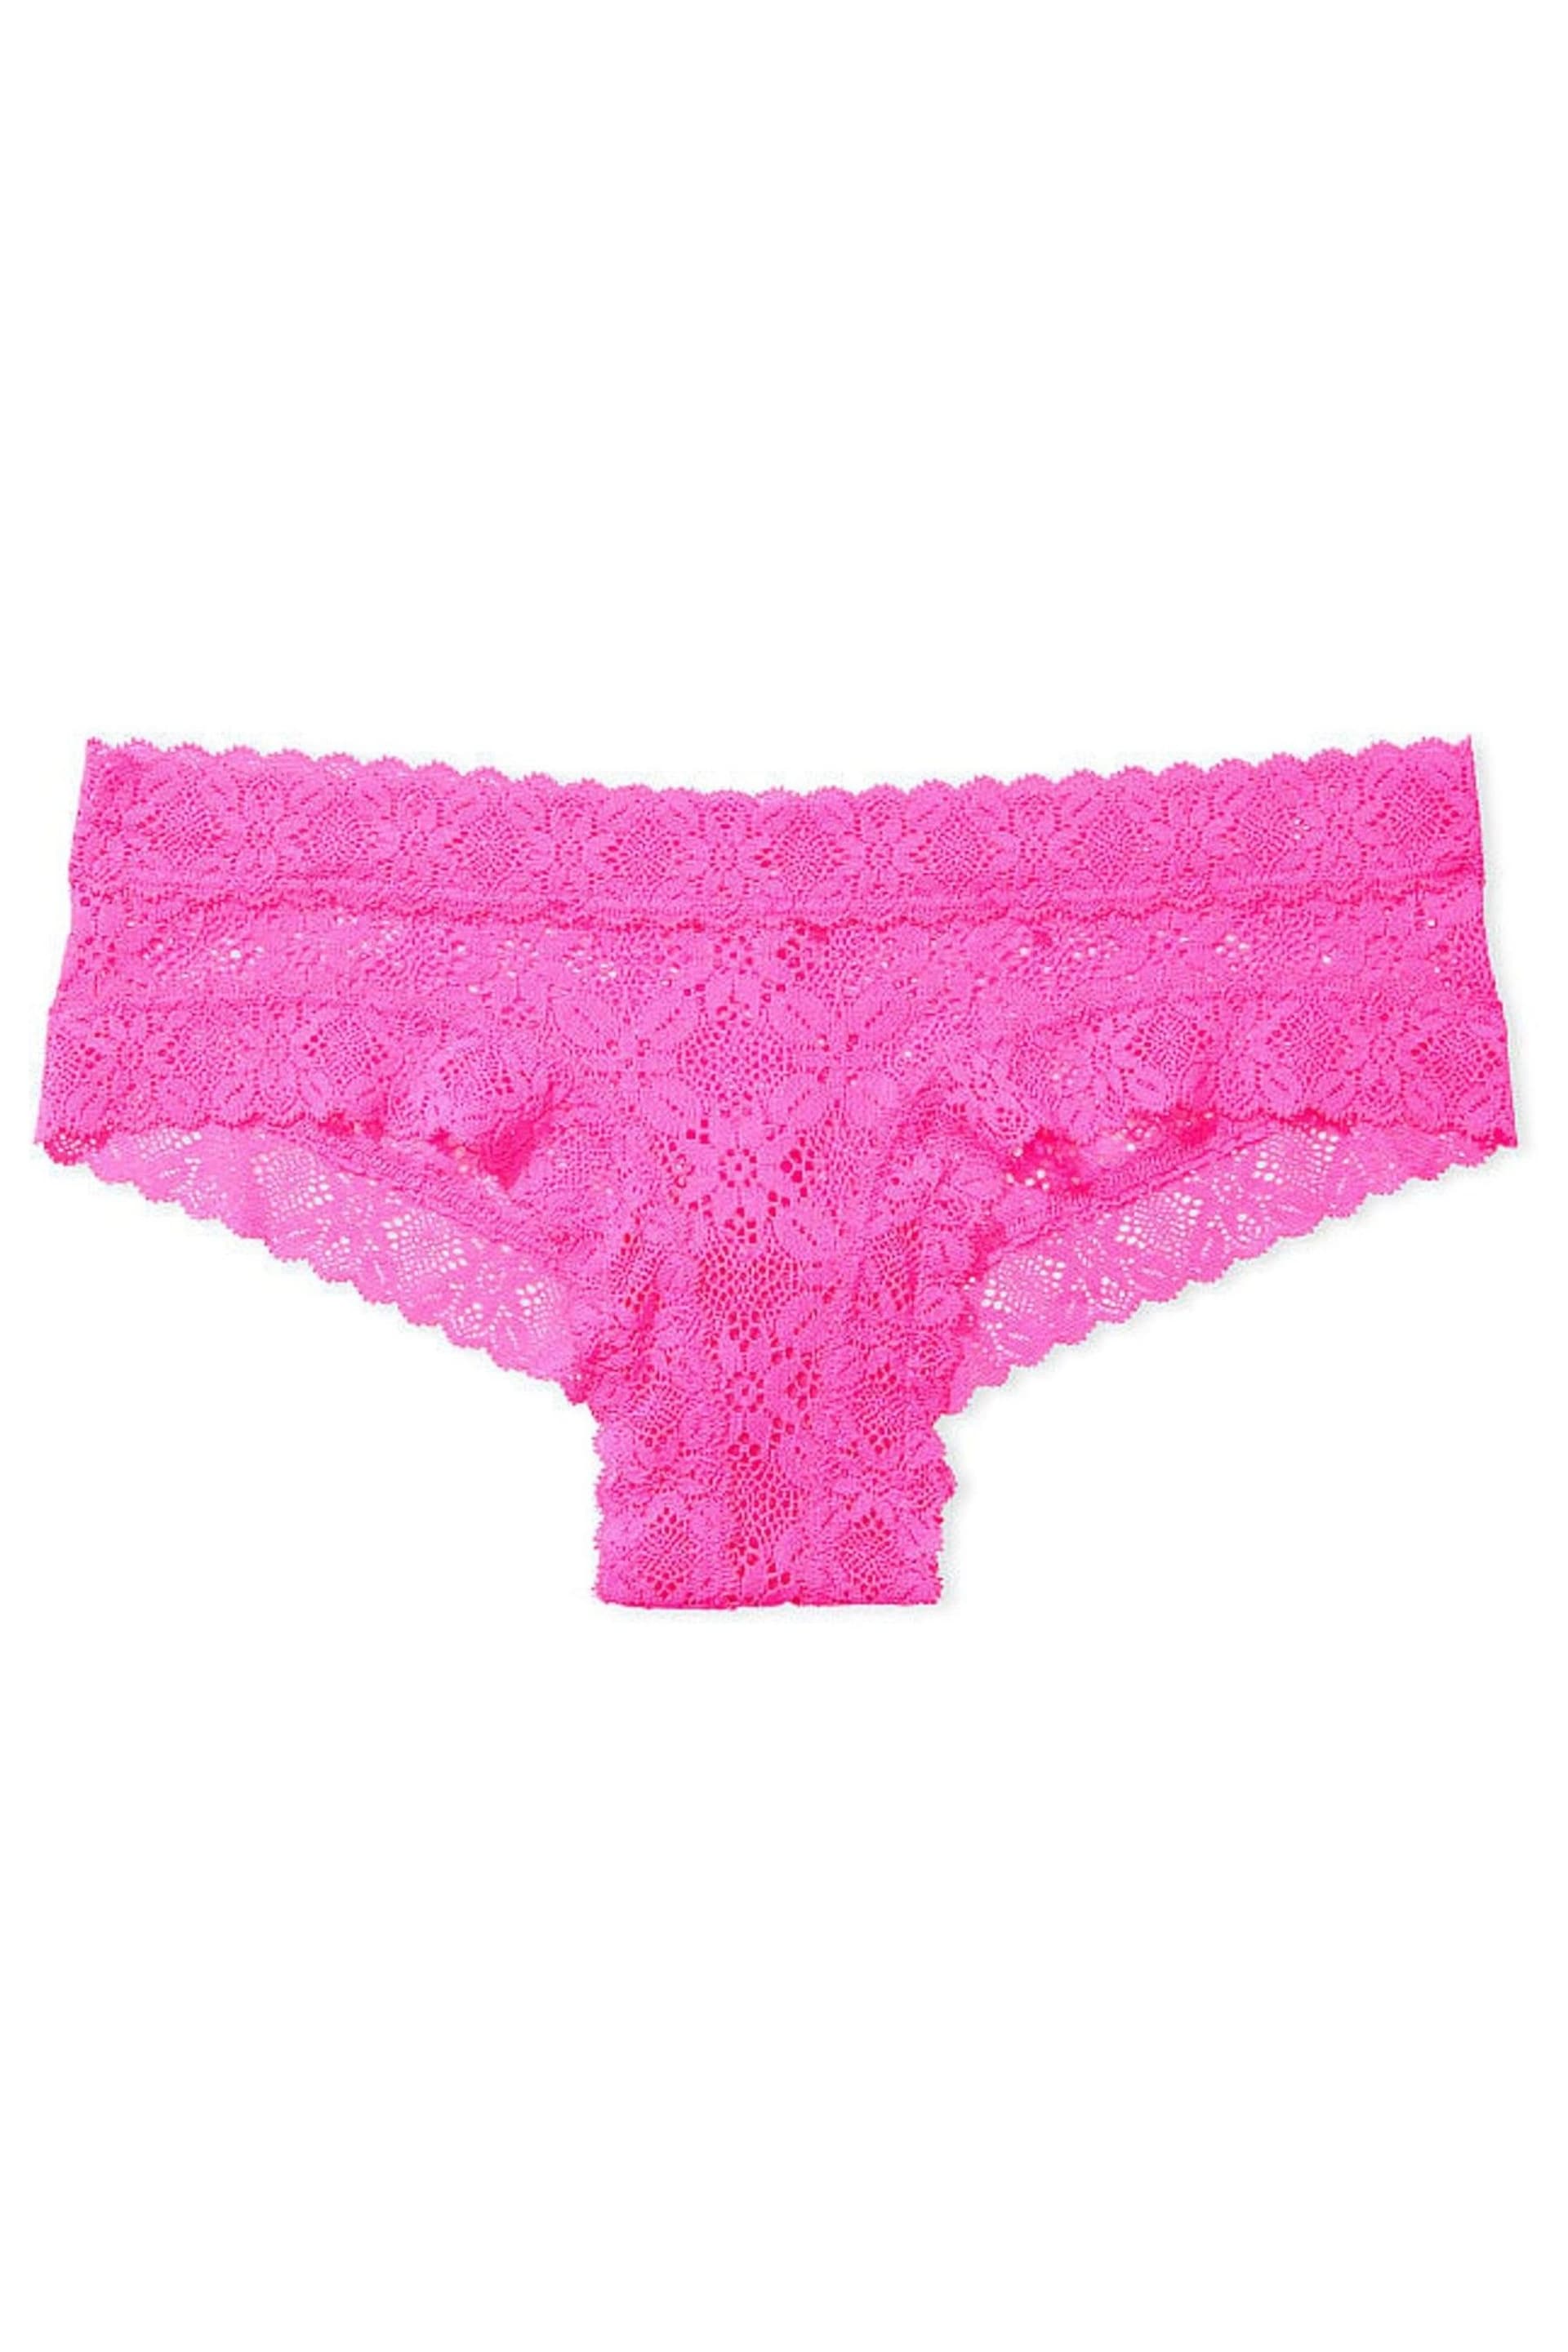 Victoria's Secret Neon Princess Pink Festival Lace Cheeky Knickers - Image 3 of 3